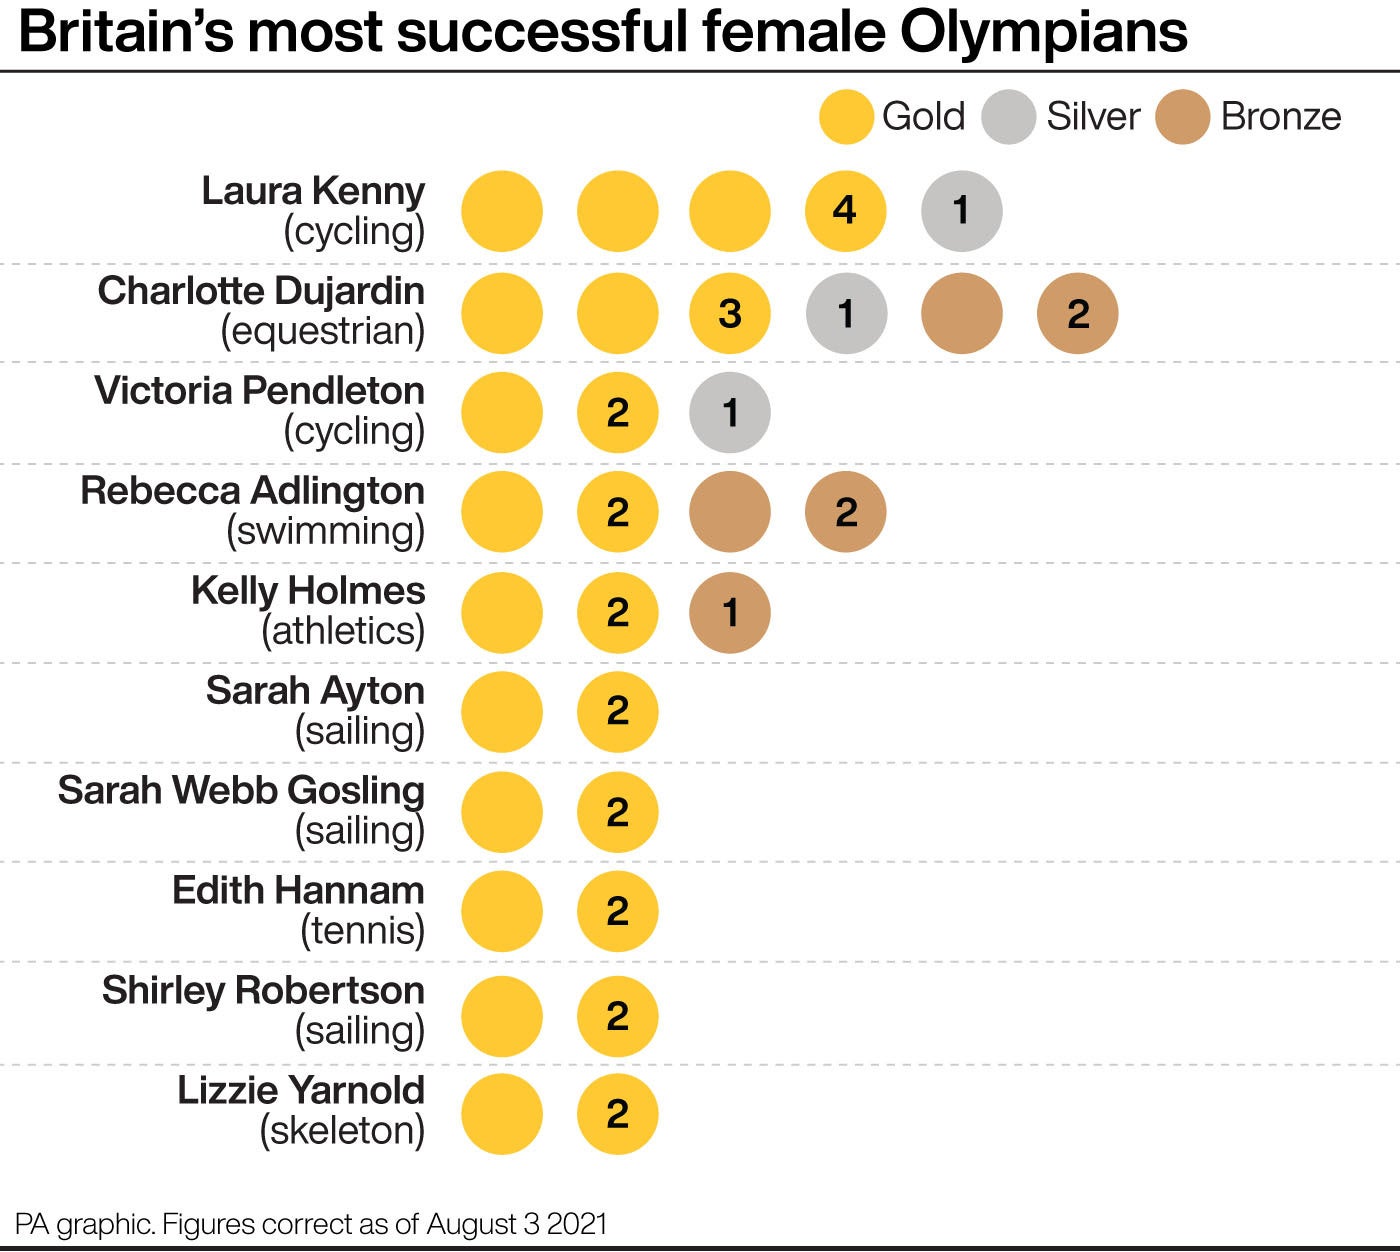 Britain’s most successful female Olympians (PA graphic)